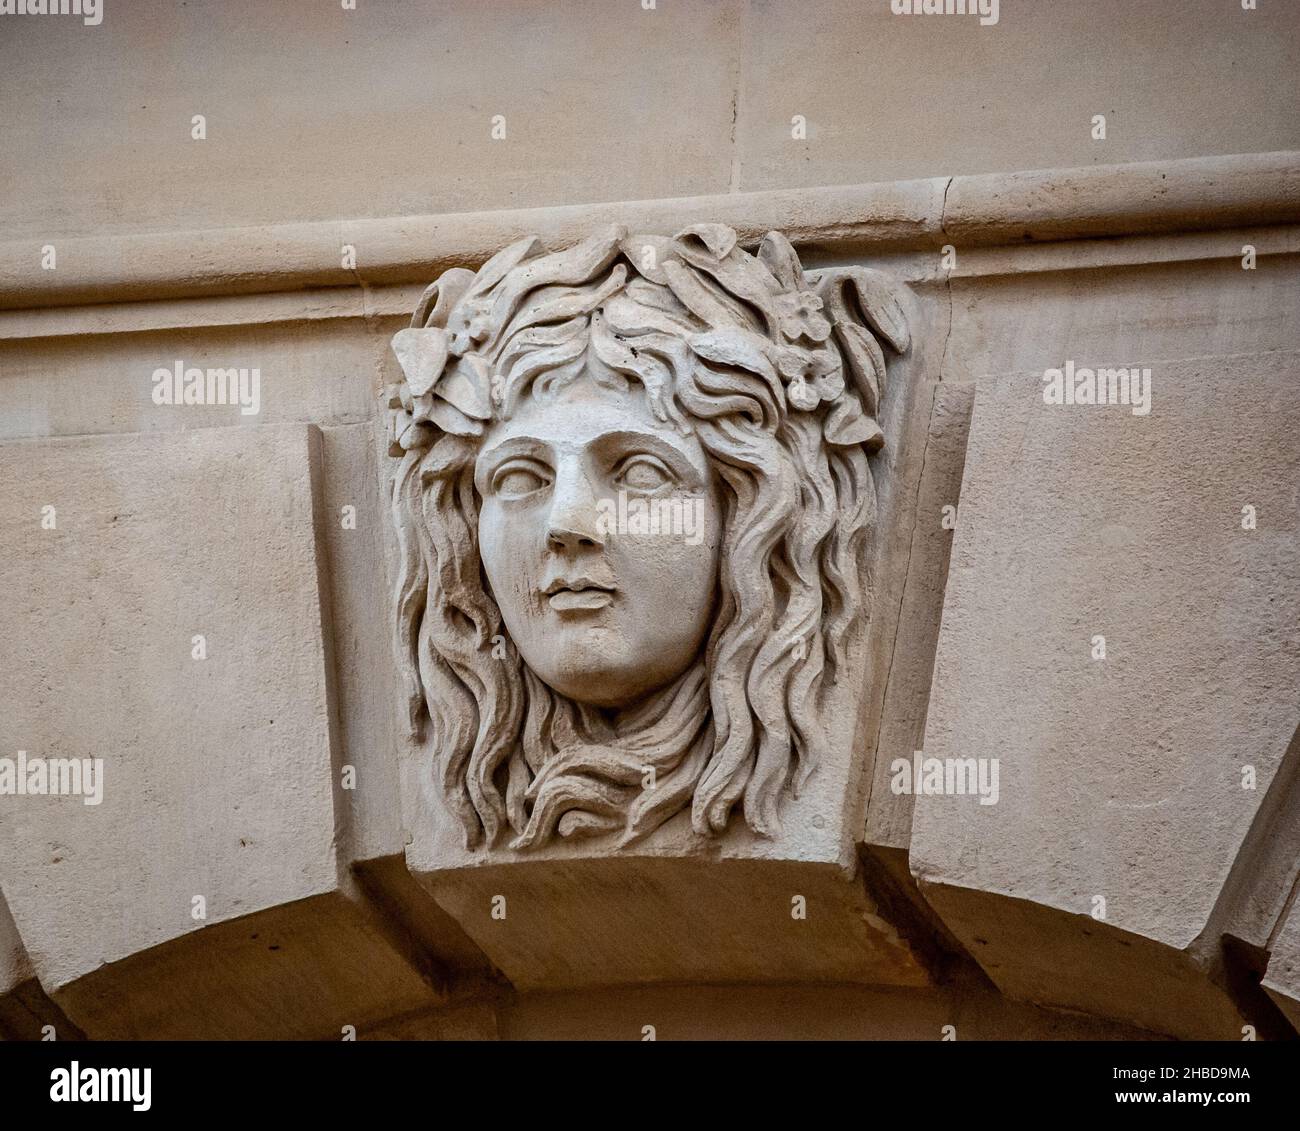 A closeup of an Ornamental Carved Stone Face of Medusa Rondanini on the facade in Paris, France Stock Photo